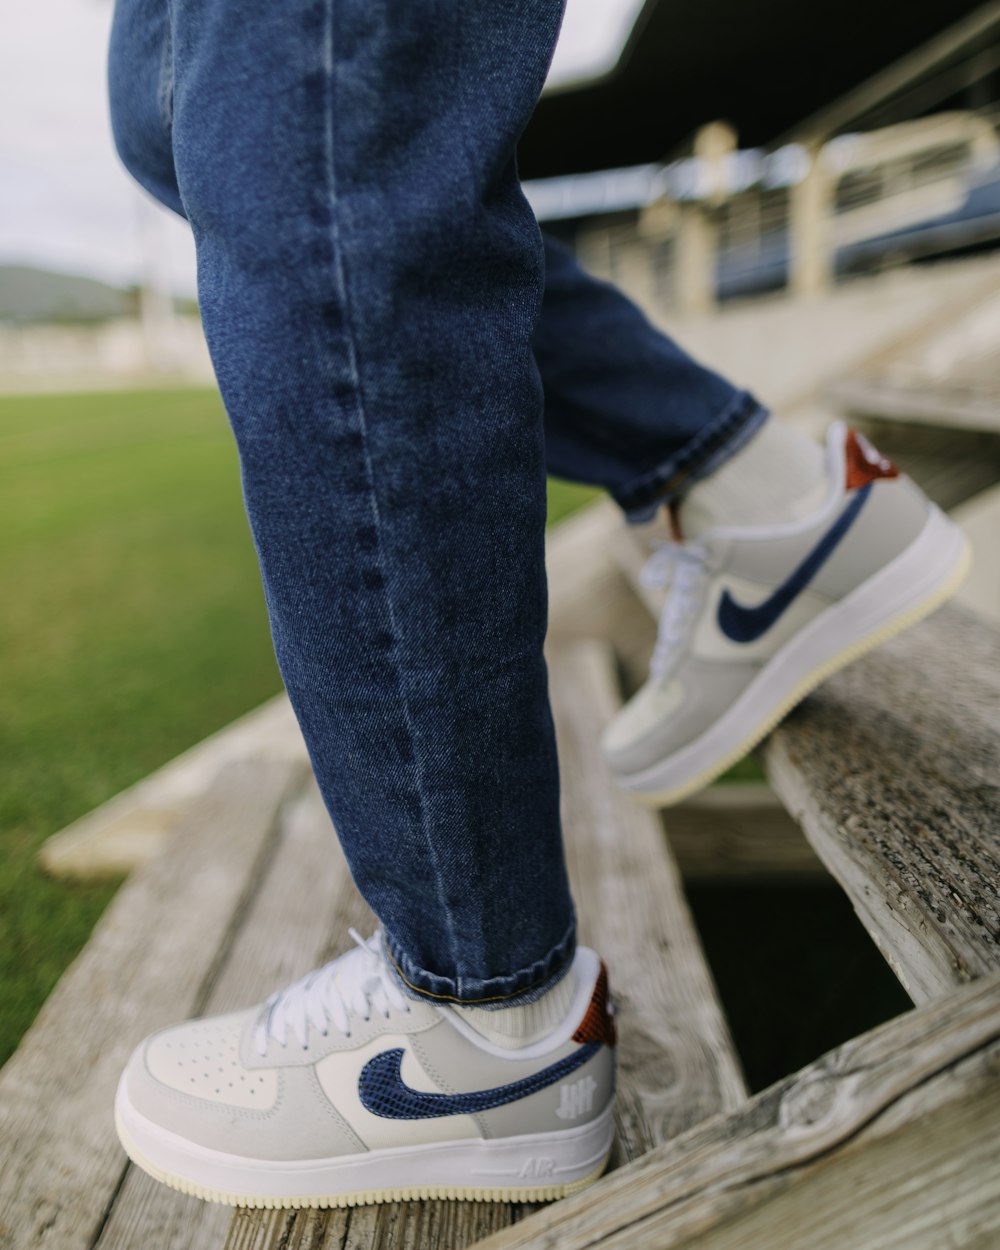 A person's legs and shoes photo – Free Nike Image on Unsplash